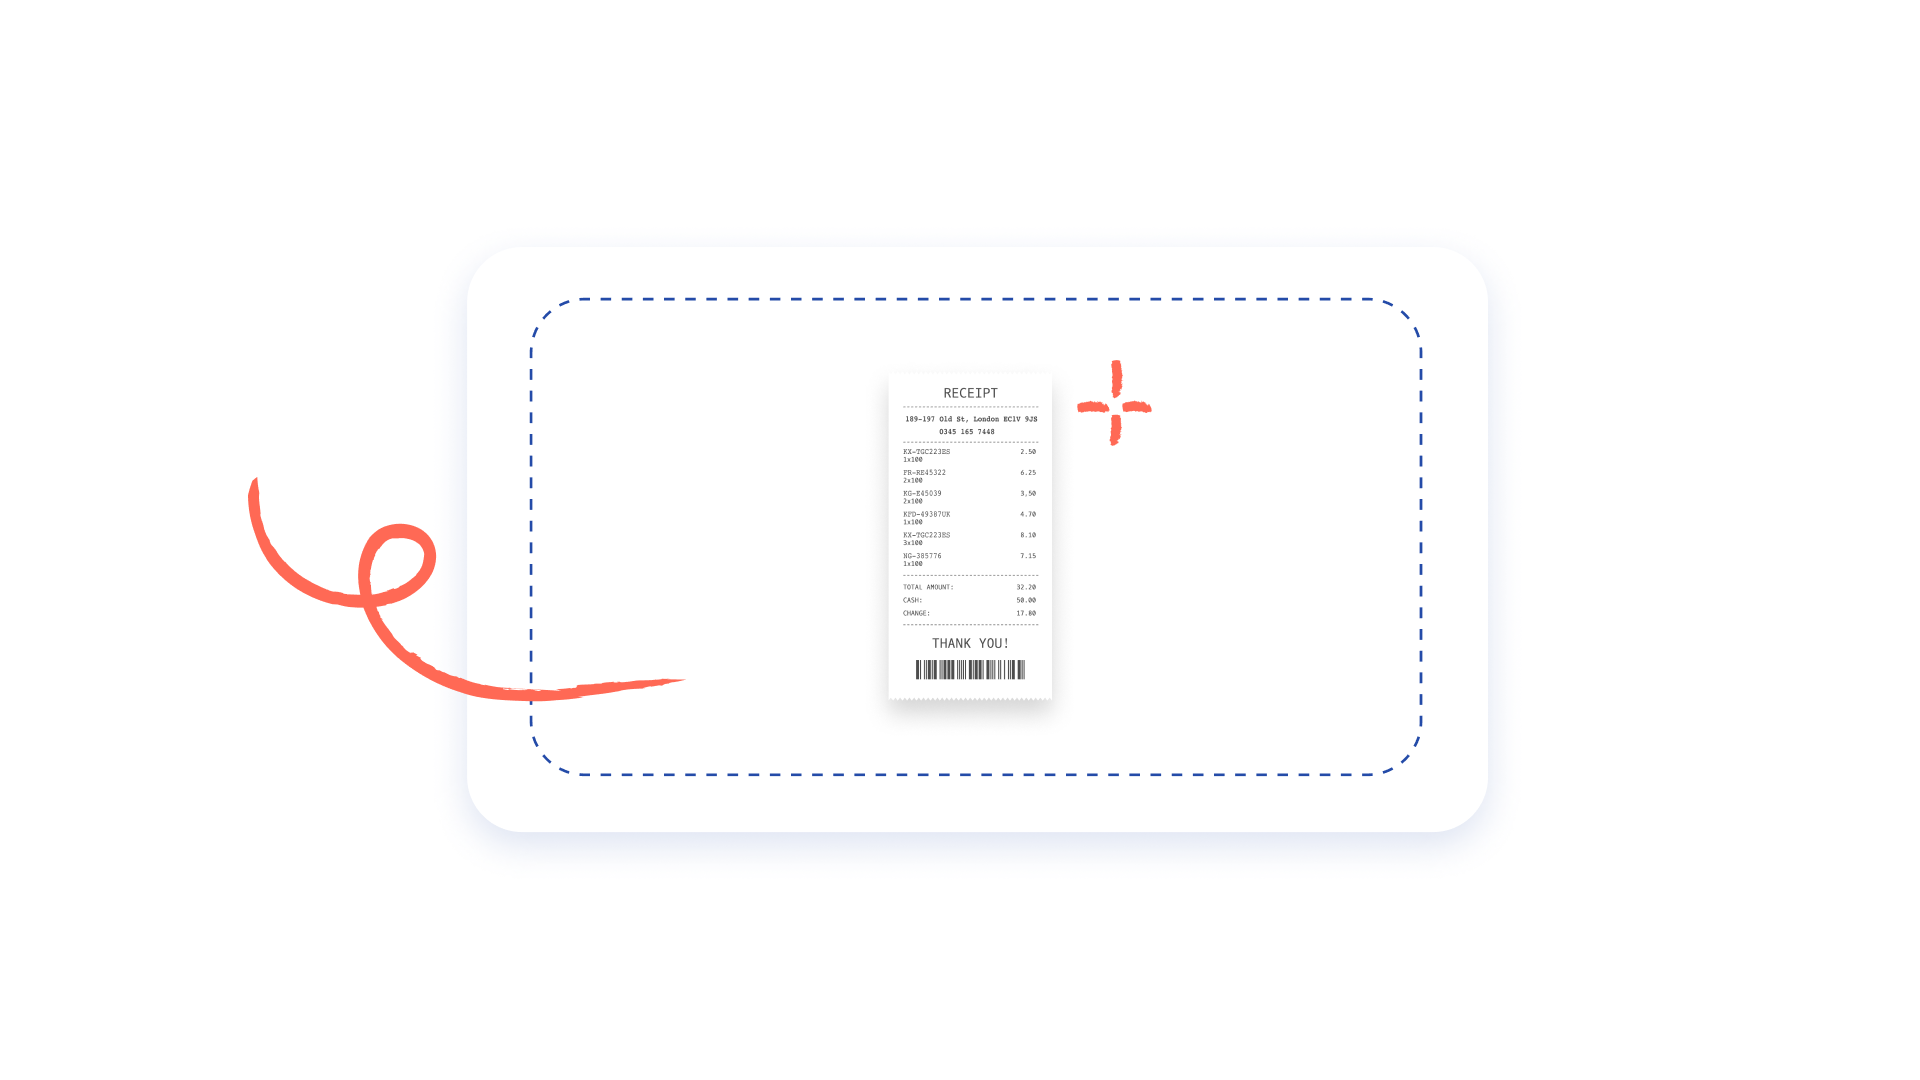 Easily upload your receipts with Osome